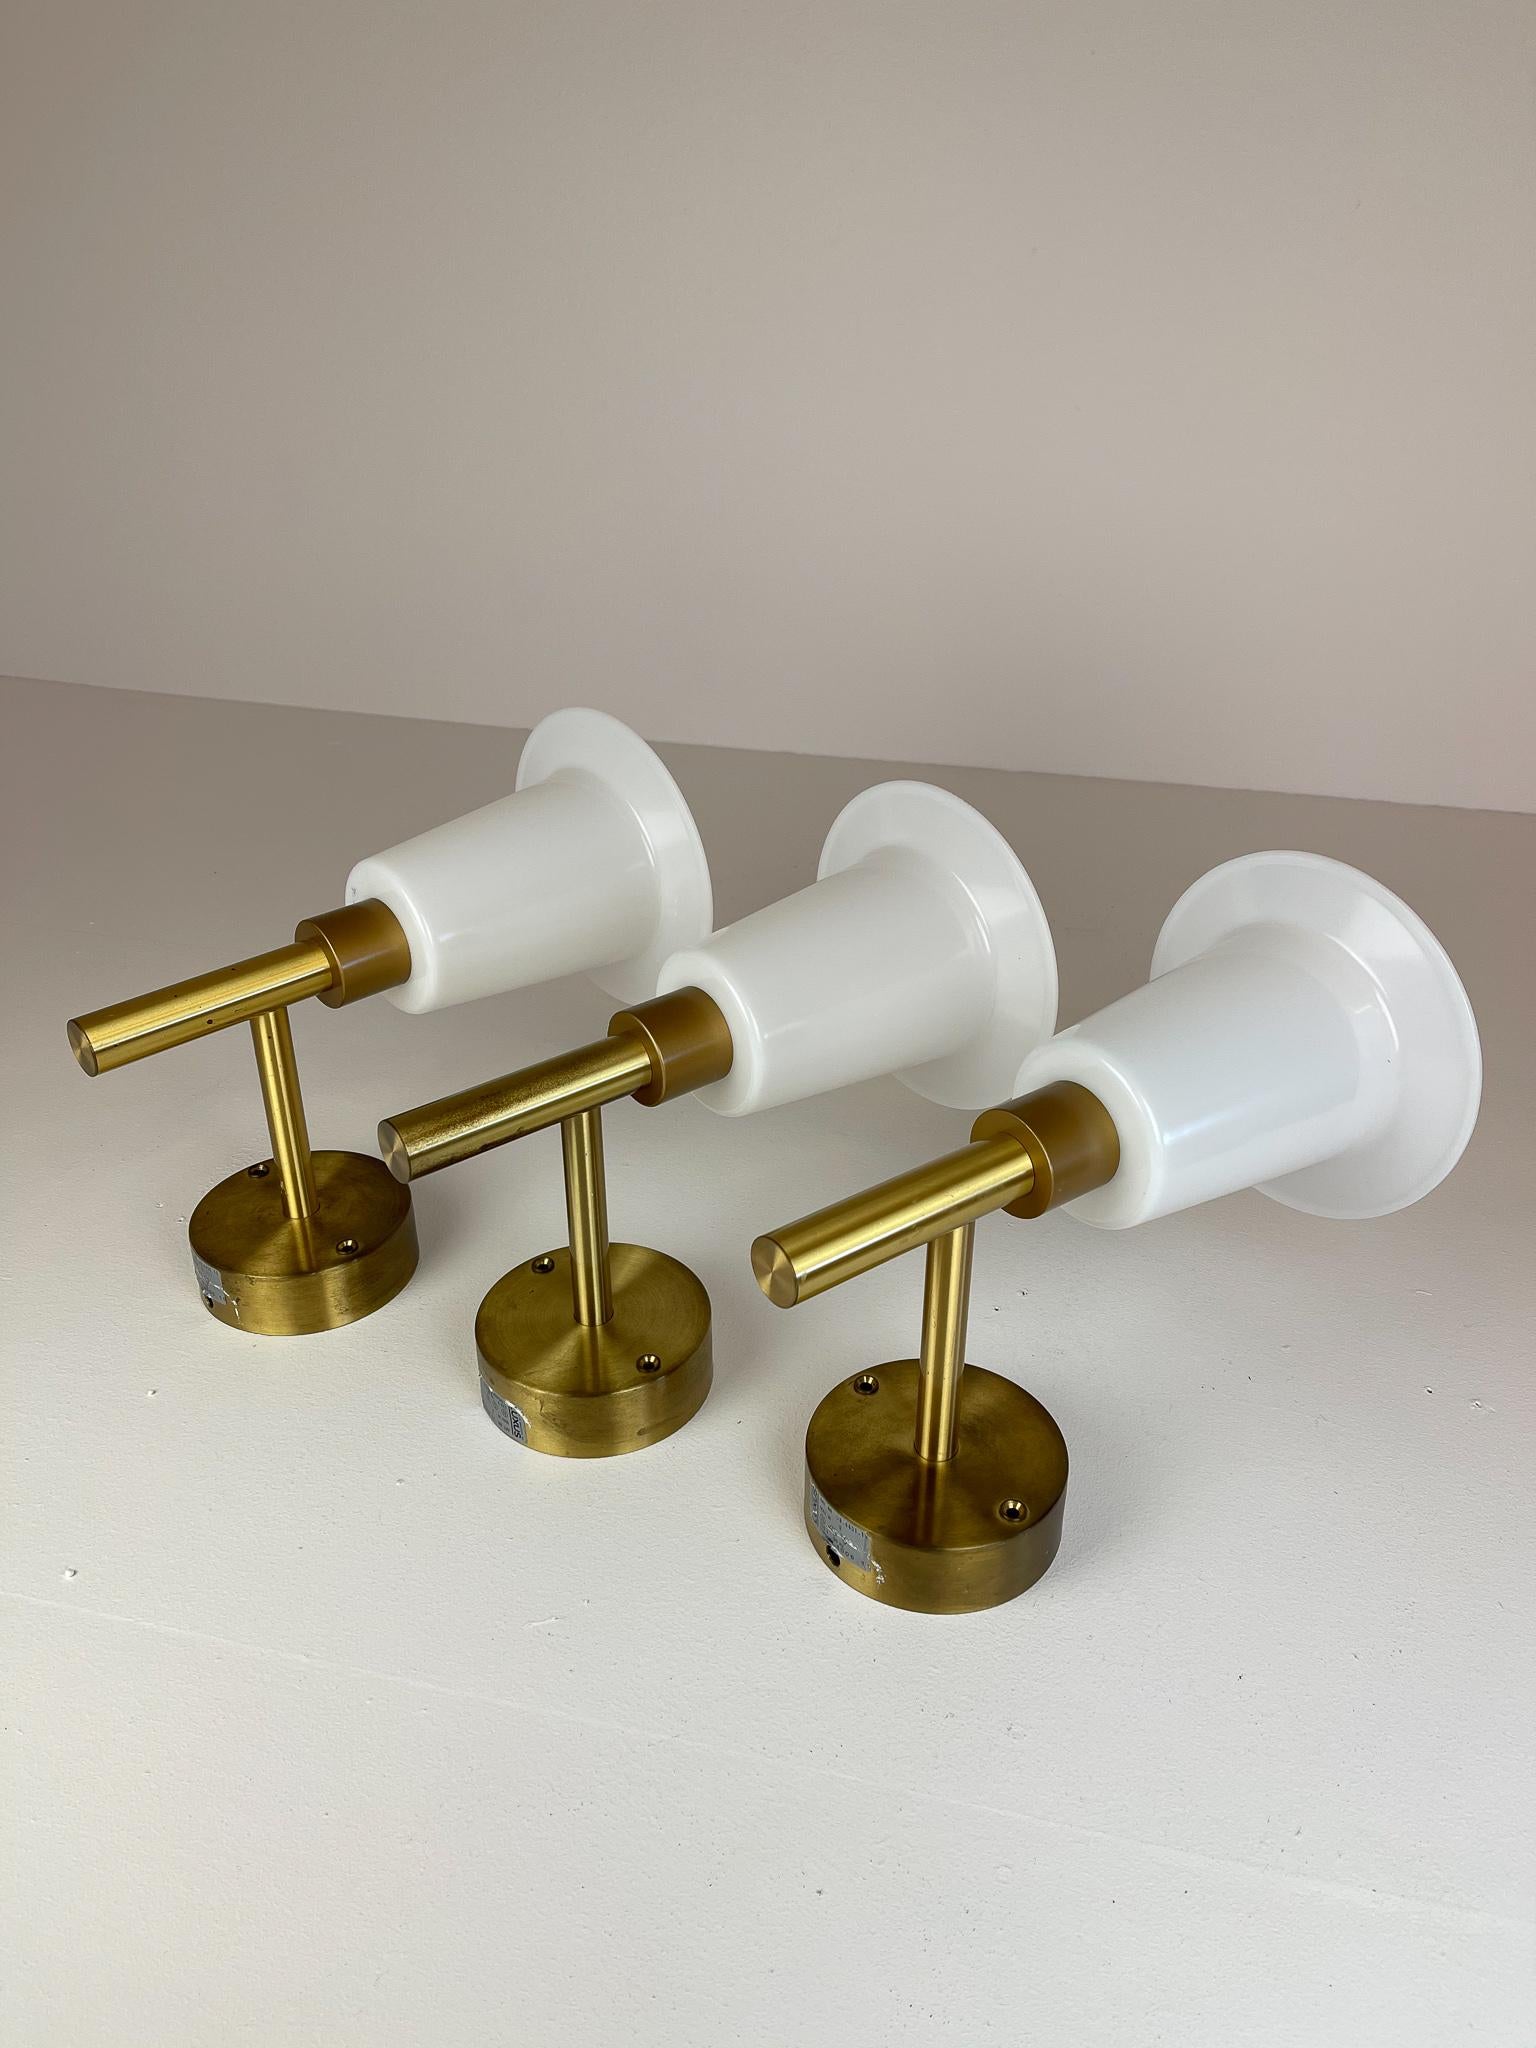 Midcentury Wall-Mounted Brass and Acrylic Lamps Luxus, Sweden, 1960s For Sale 1